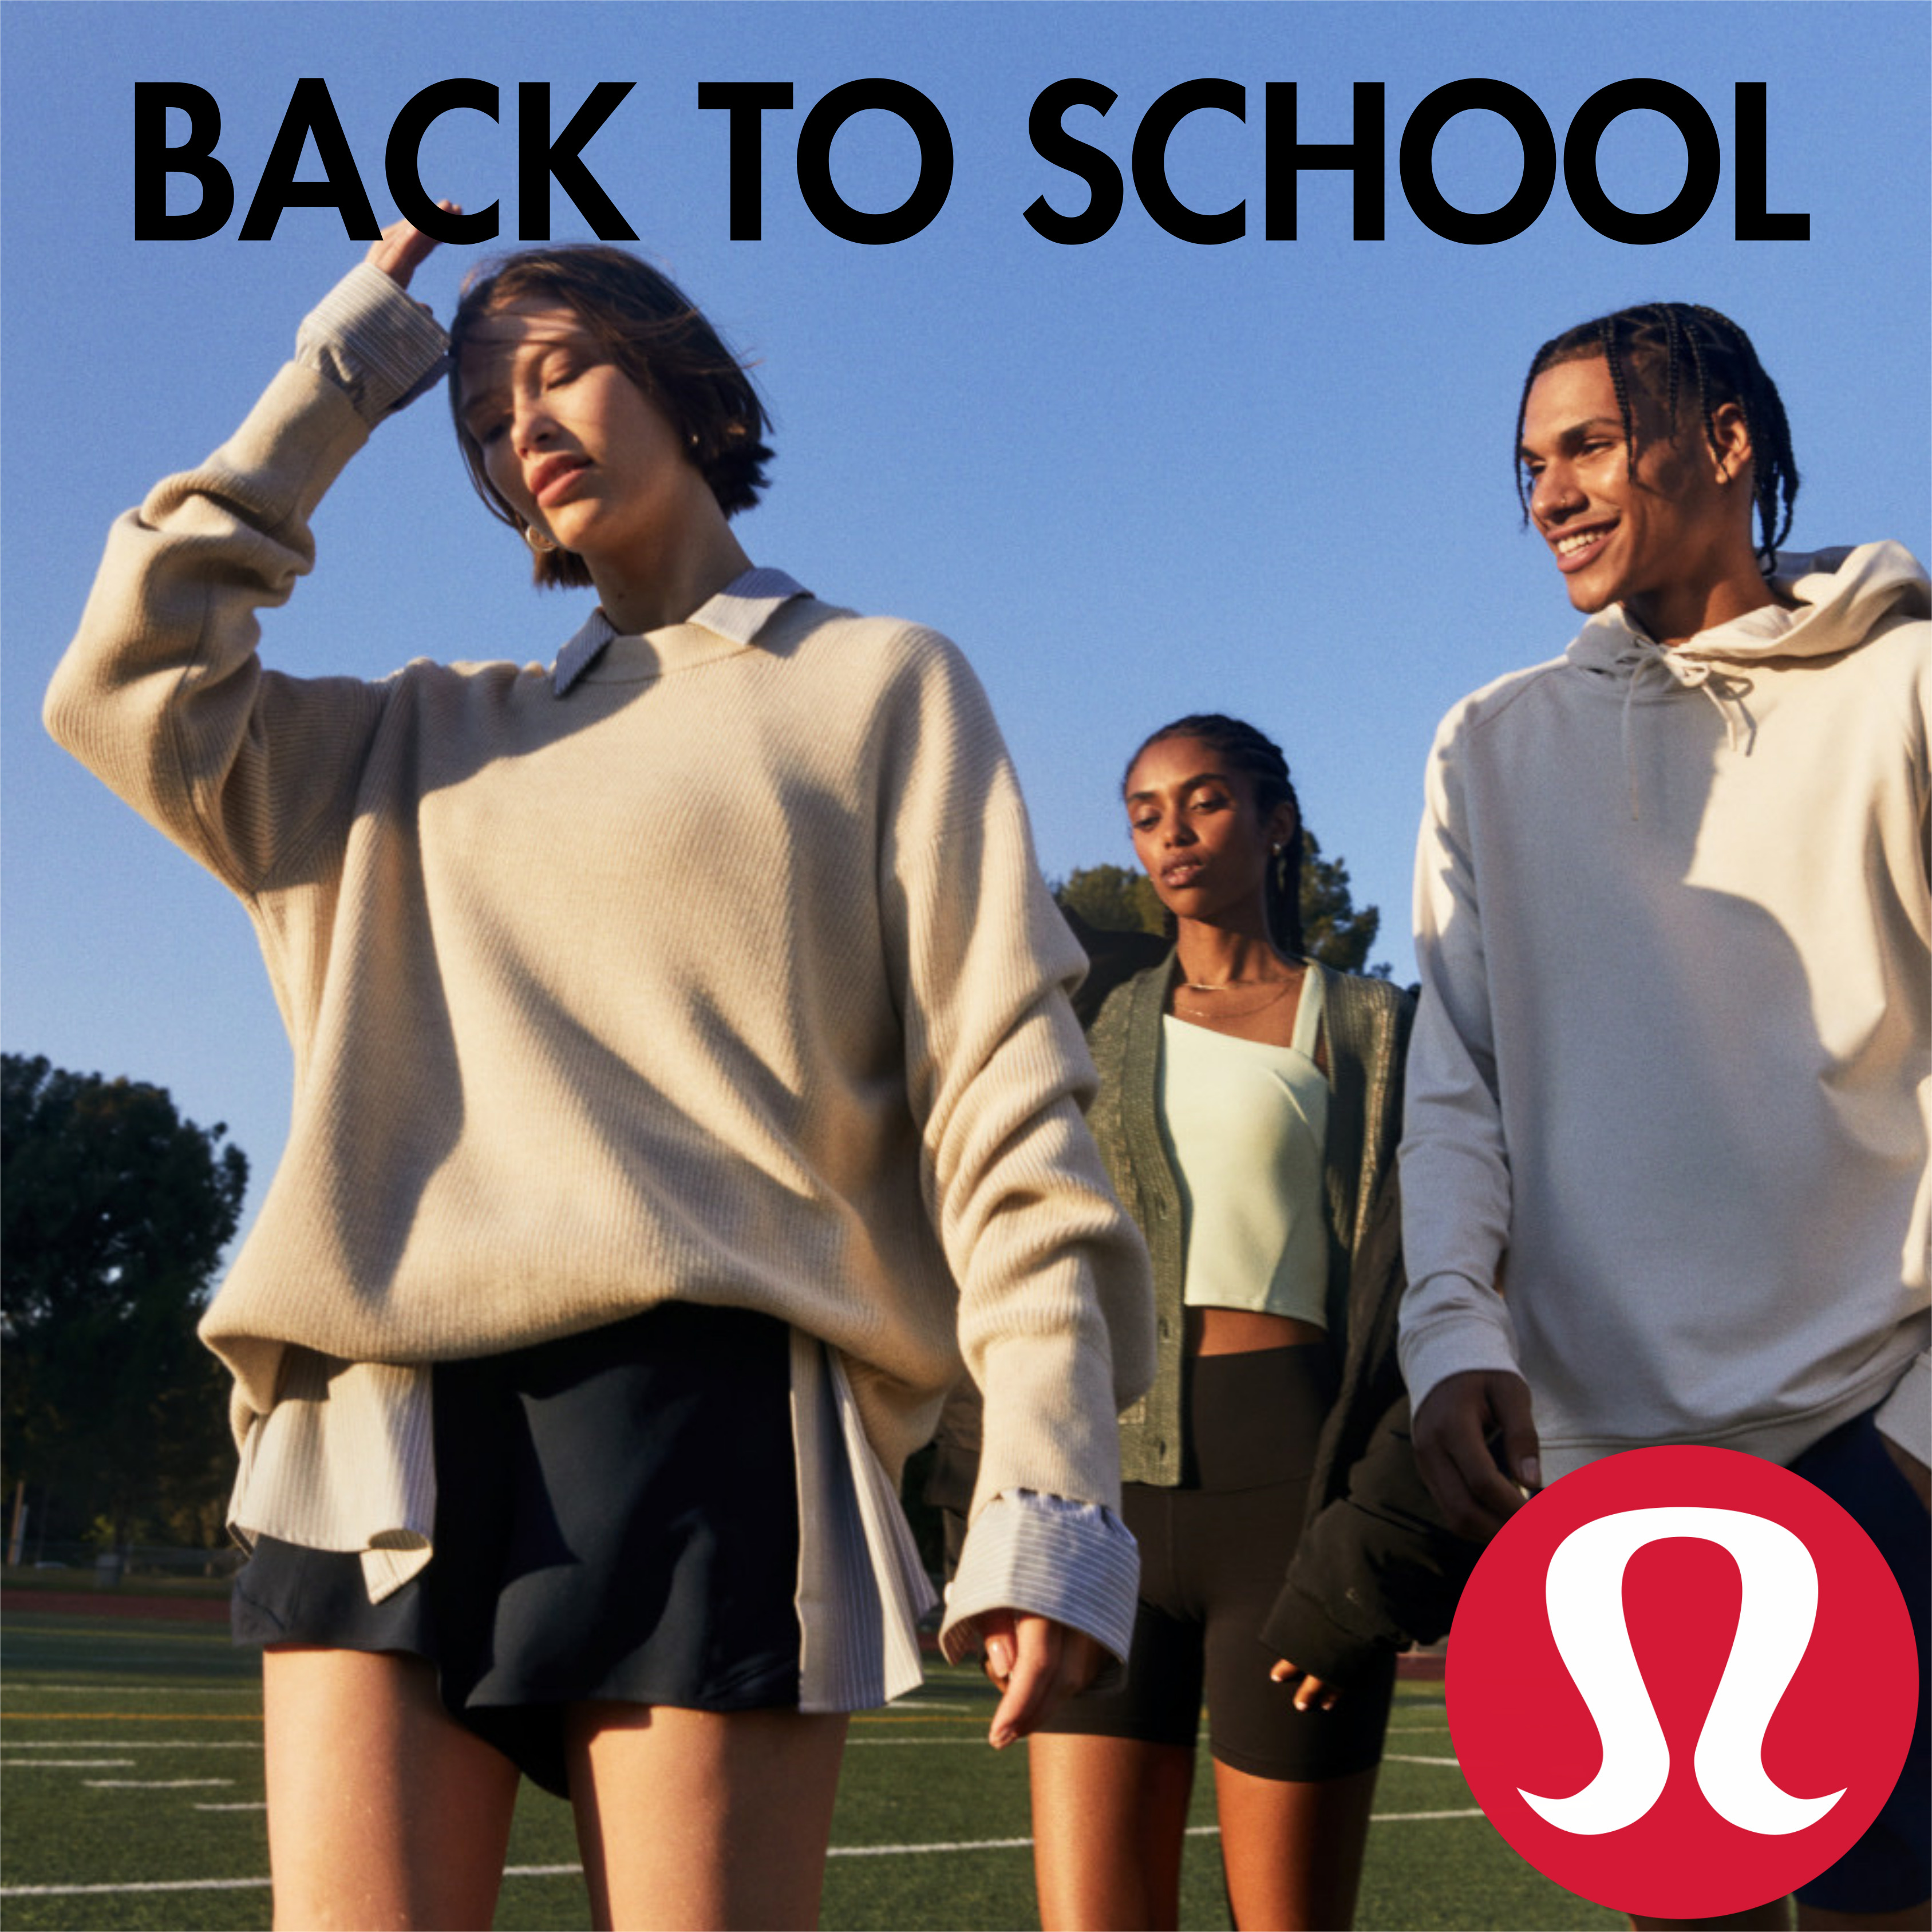 Lululemon College Apparel Must-Haves for Back-to-School Season